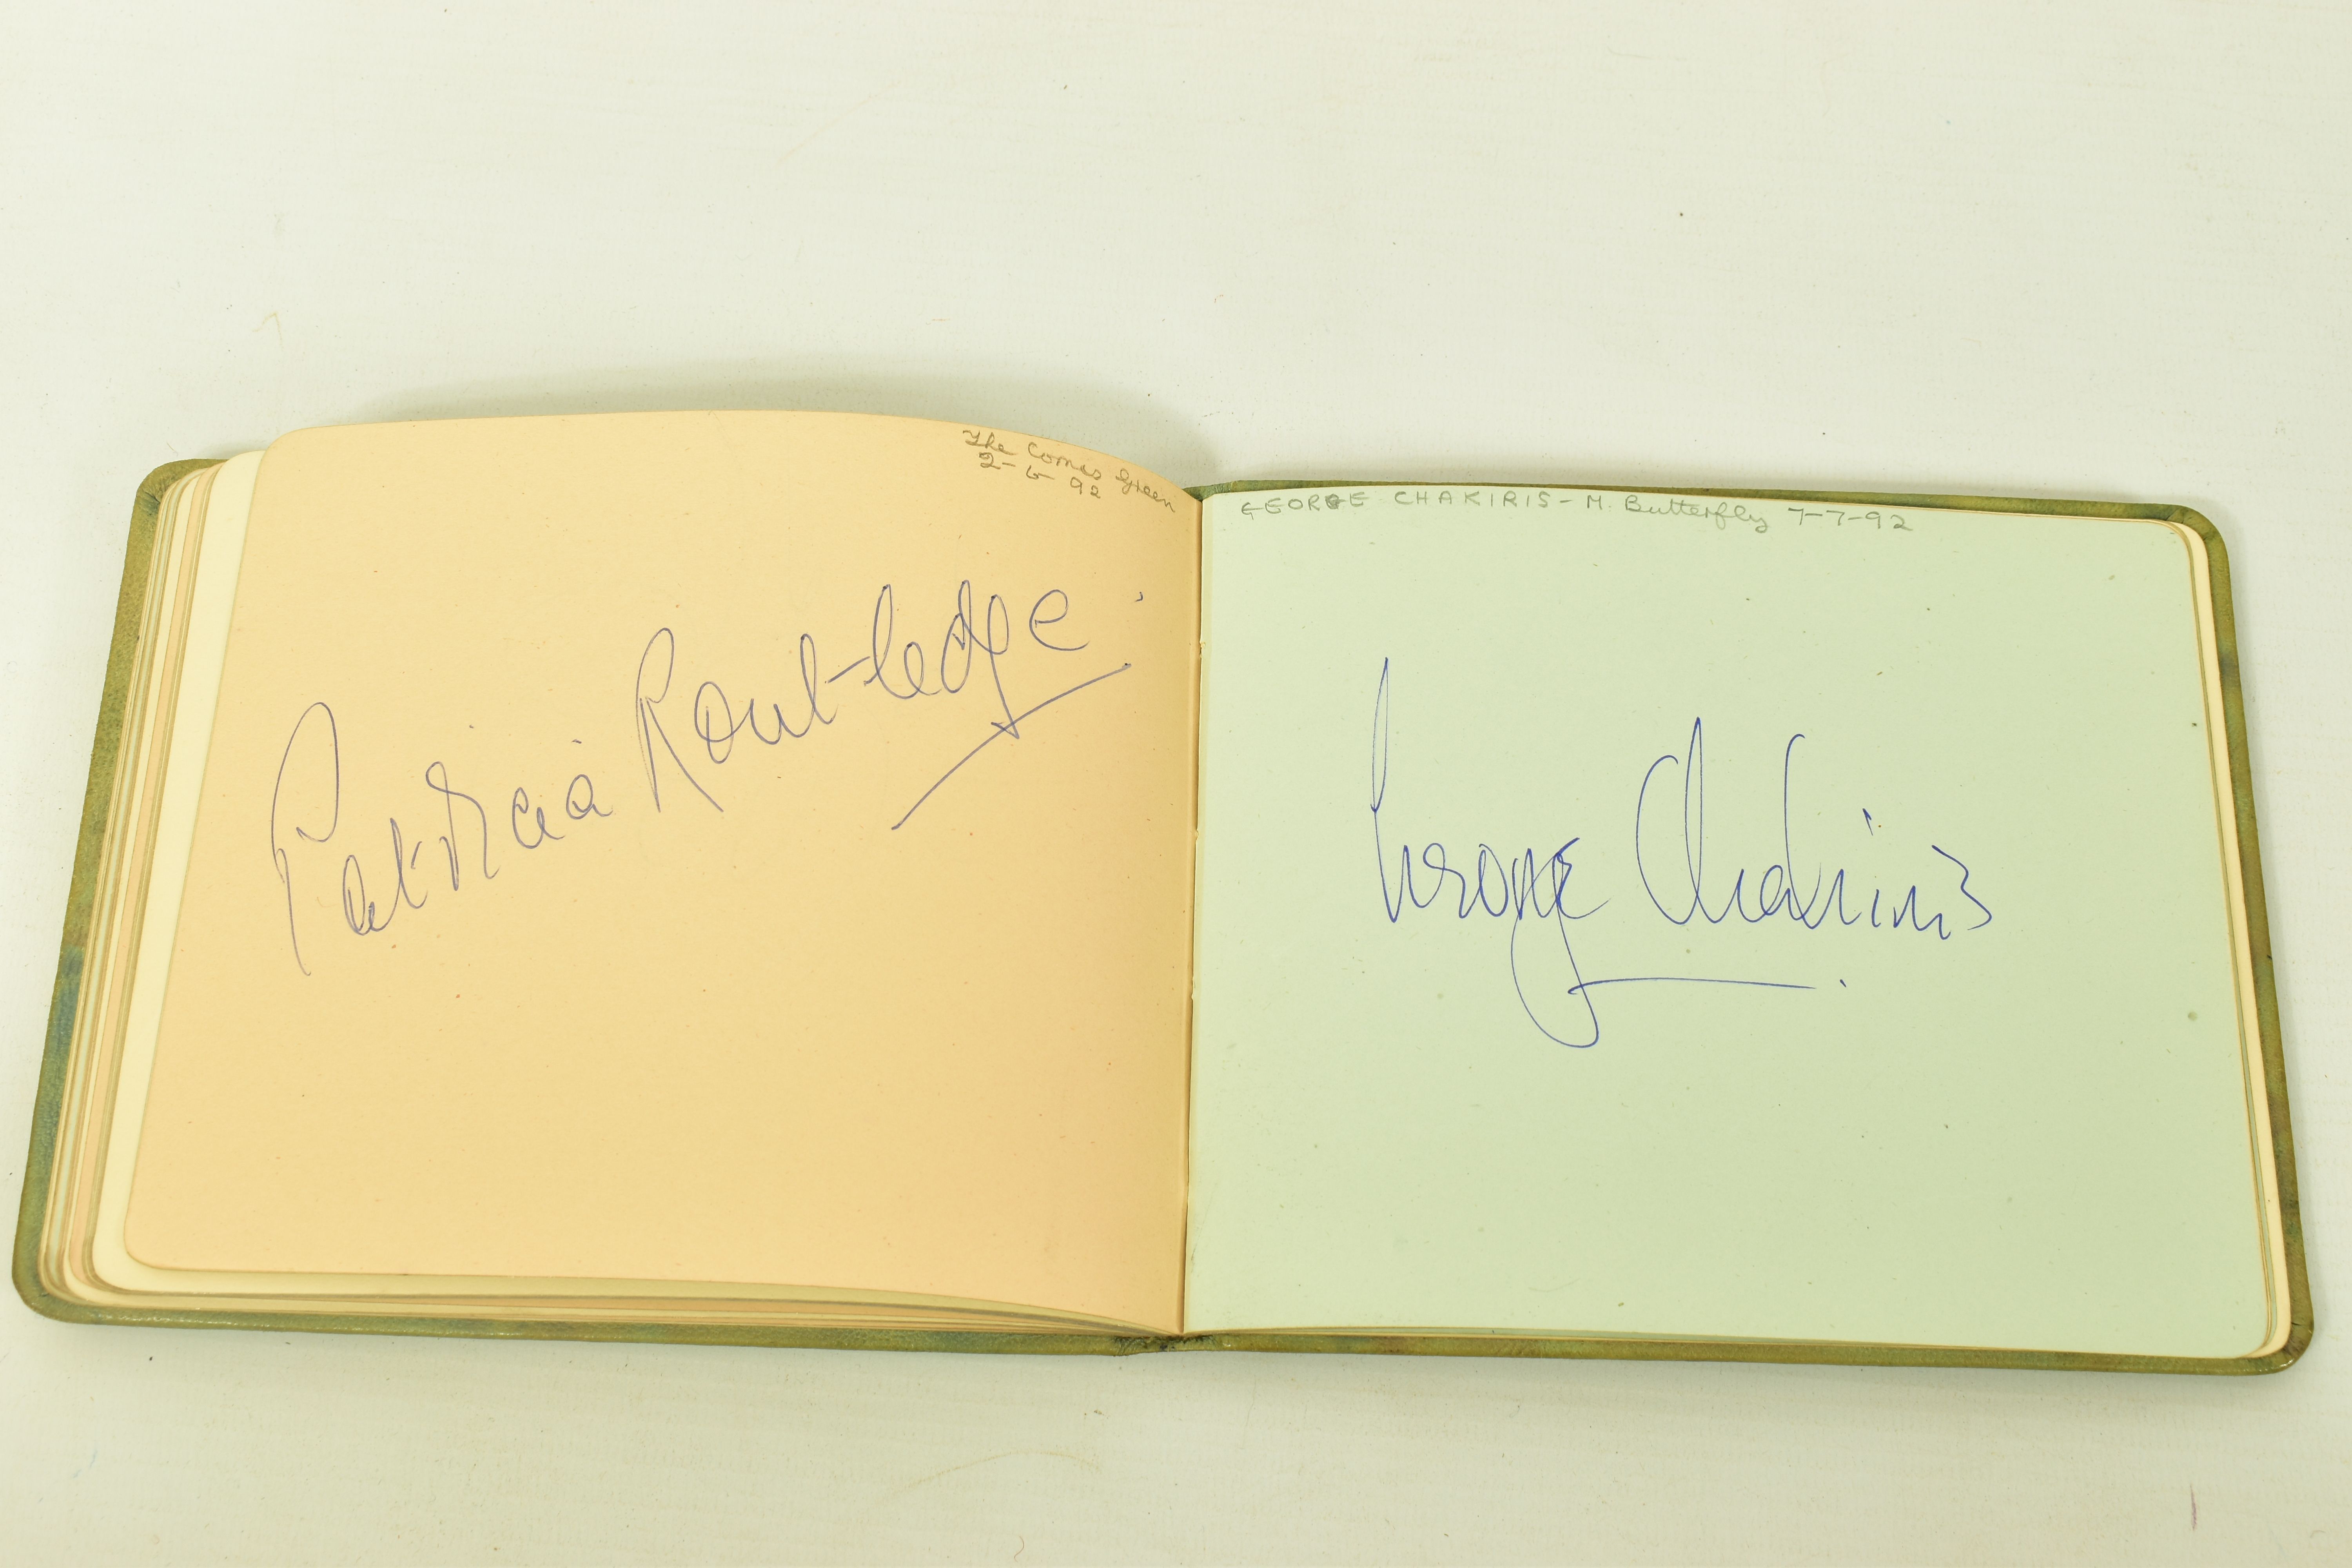 FILM & STAGE AUTOGRAPH ALBUM, a collection of signatures in an autograph album featuring some of the - Image 8 of 12